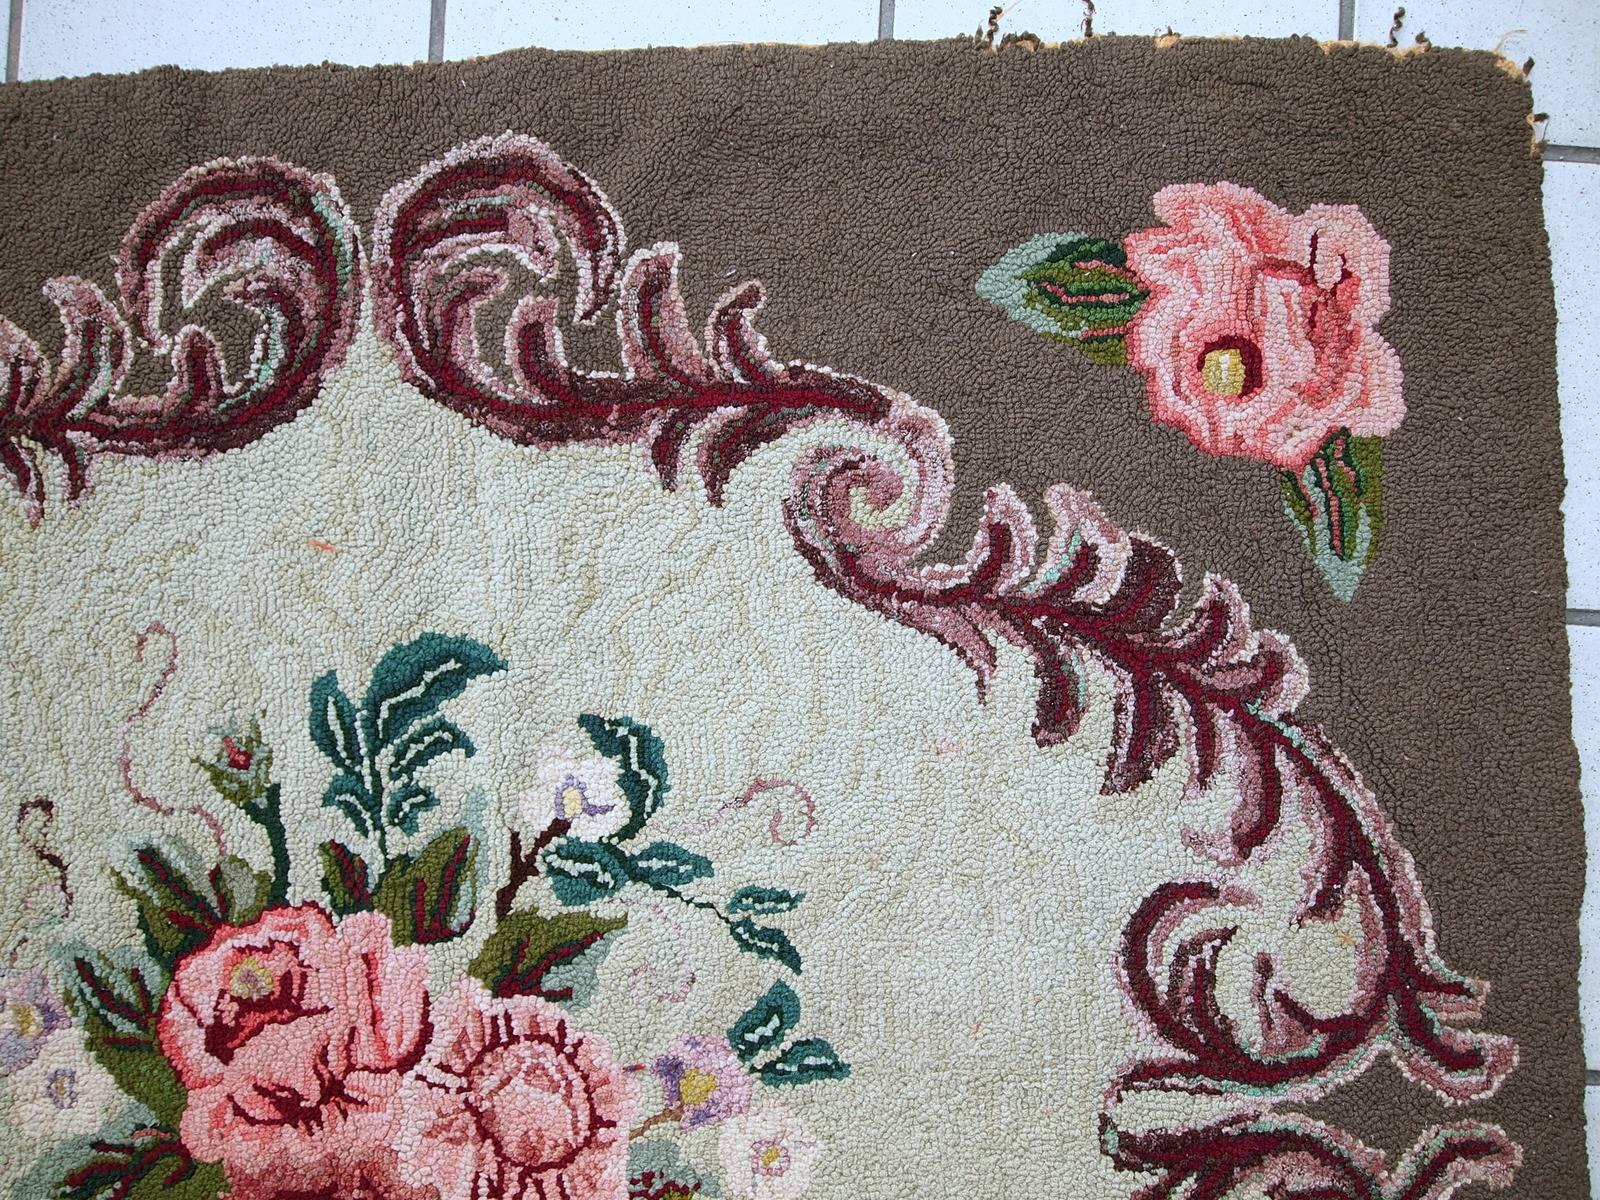 Antique American squarish hooked rug in good condition. The rug has squarish shape and made in very light shade of green for the background with the brown border around. It has been made in Victorian style. Large bouquet of flowers in the centre.